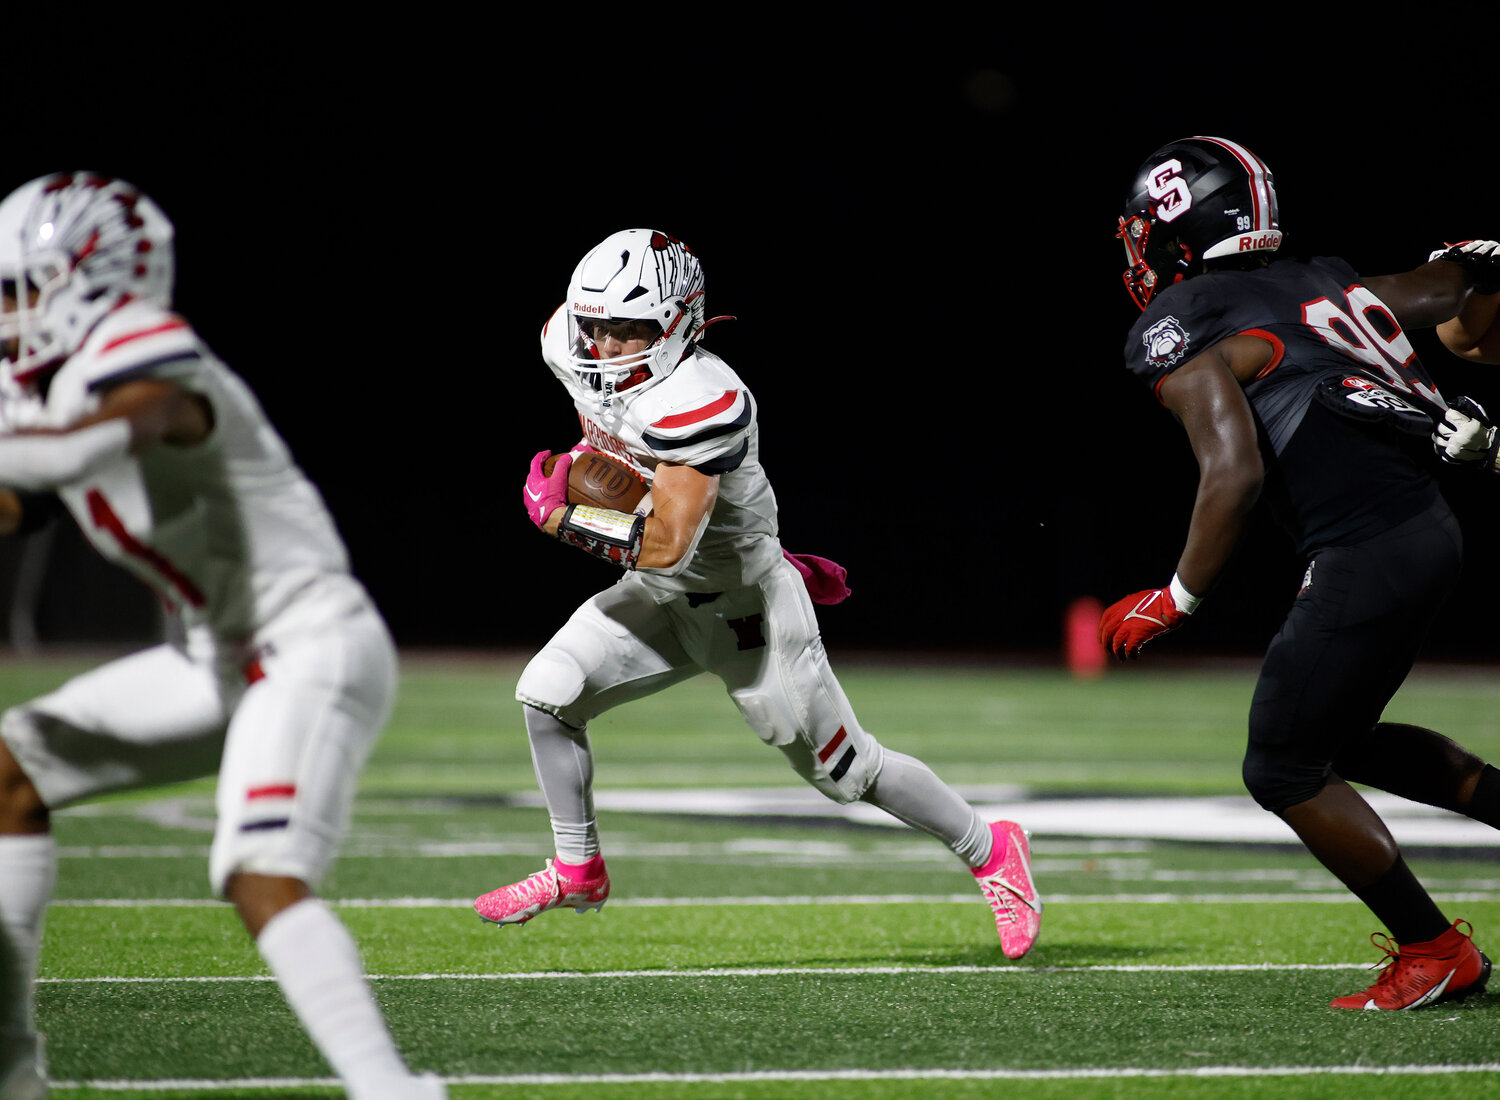 Warrenton's Austin Haas (7) carries the ball during a game against Fort Zumwalt South, Friday, Aug. 25, 2023, at Fort Zumwalt South High School in St. Peters, Mo.